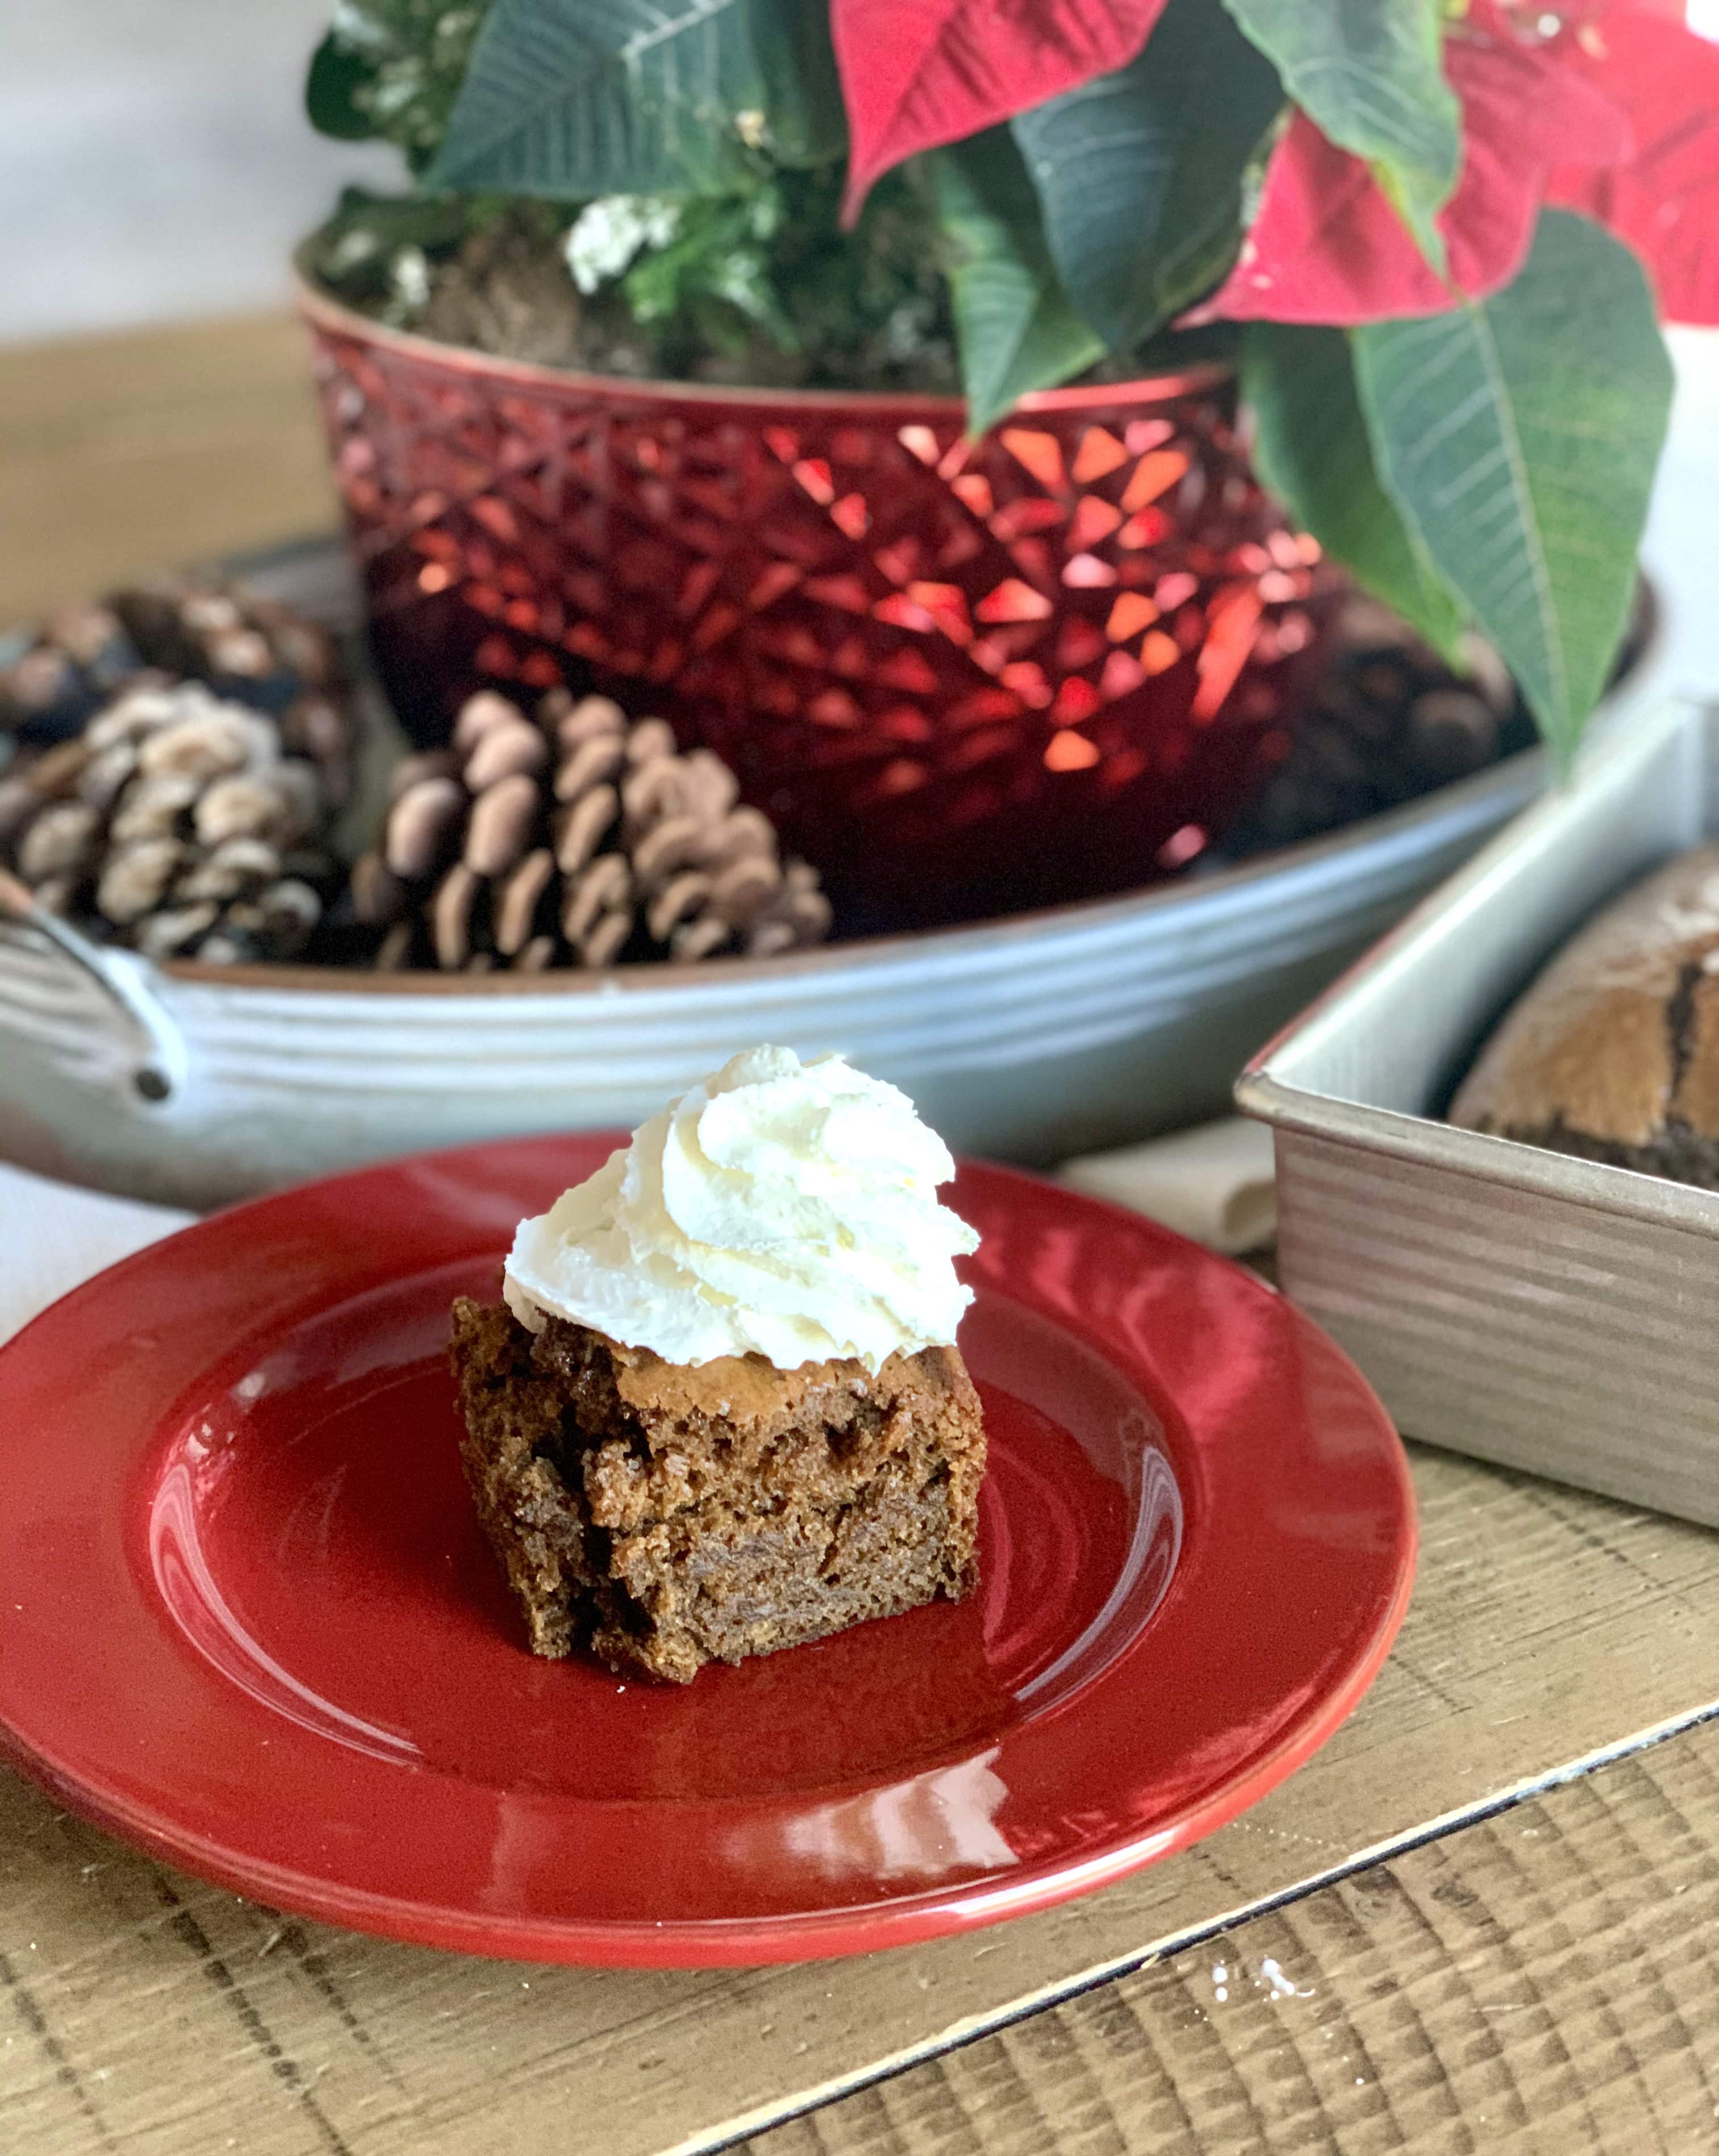 Gingerbread Snack Cake with Sourdough Discard